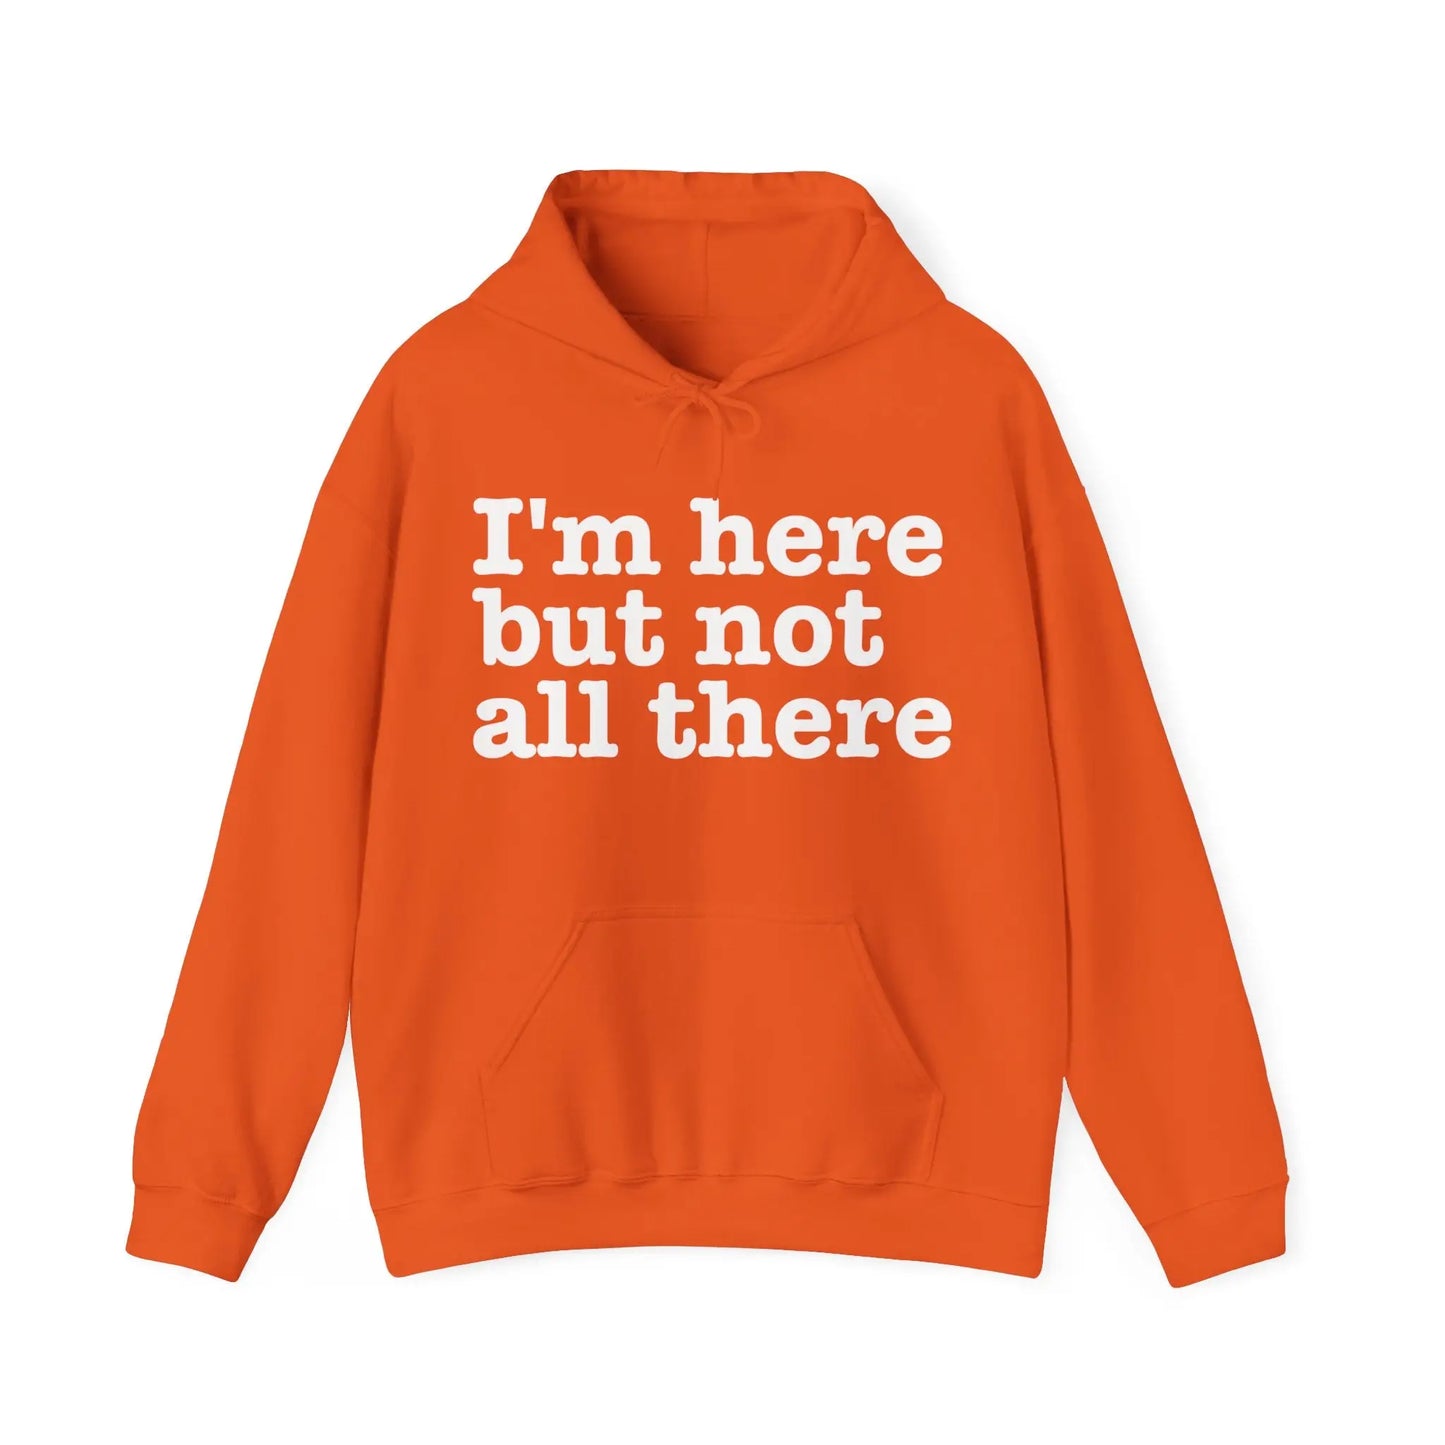 I'm Here But Not All There Men's Hooded Sweatshirt - Wicked Tees